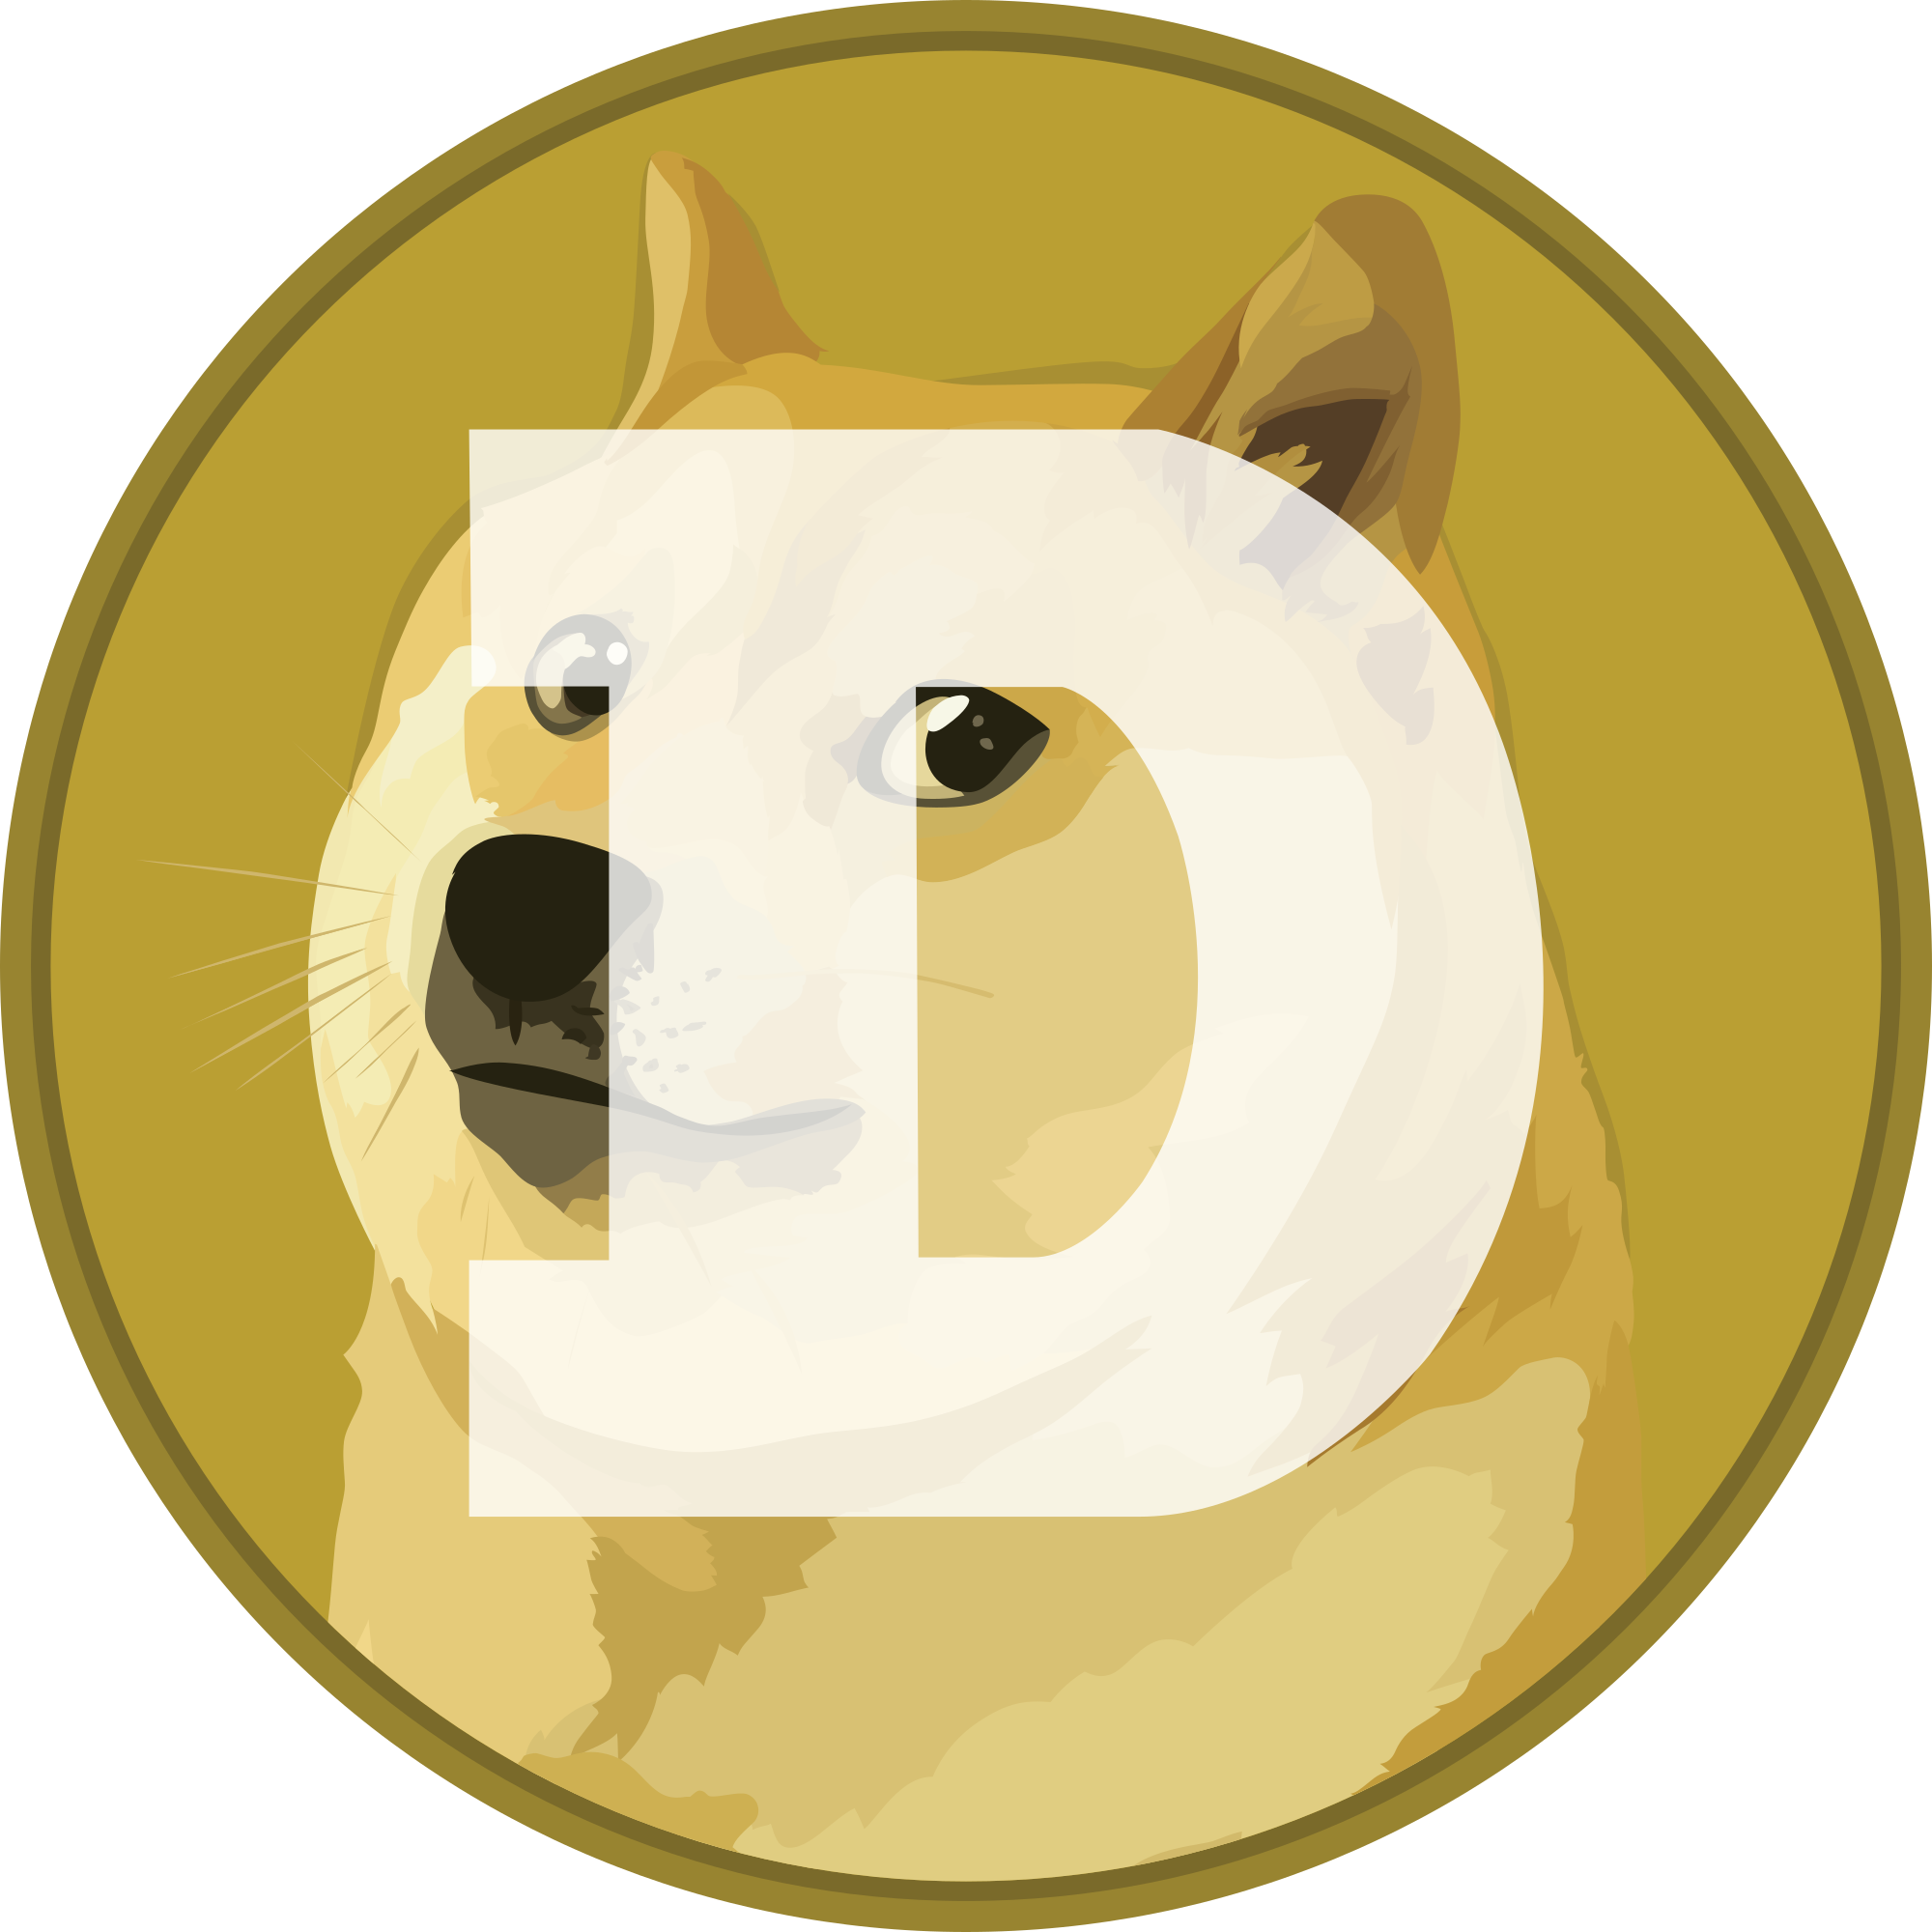 Dogecoin Price Prediction: As DOGE Plummets 11%, Enter New ICO Dogecoin20 With $250K Raise In A Day